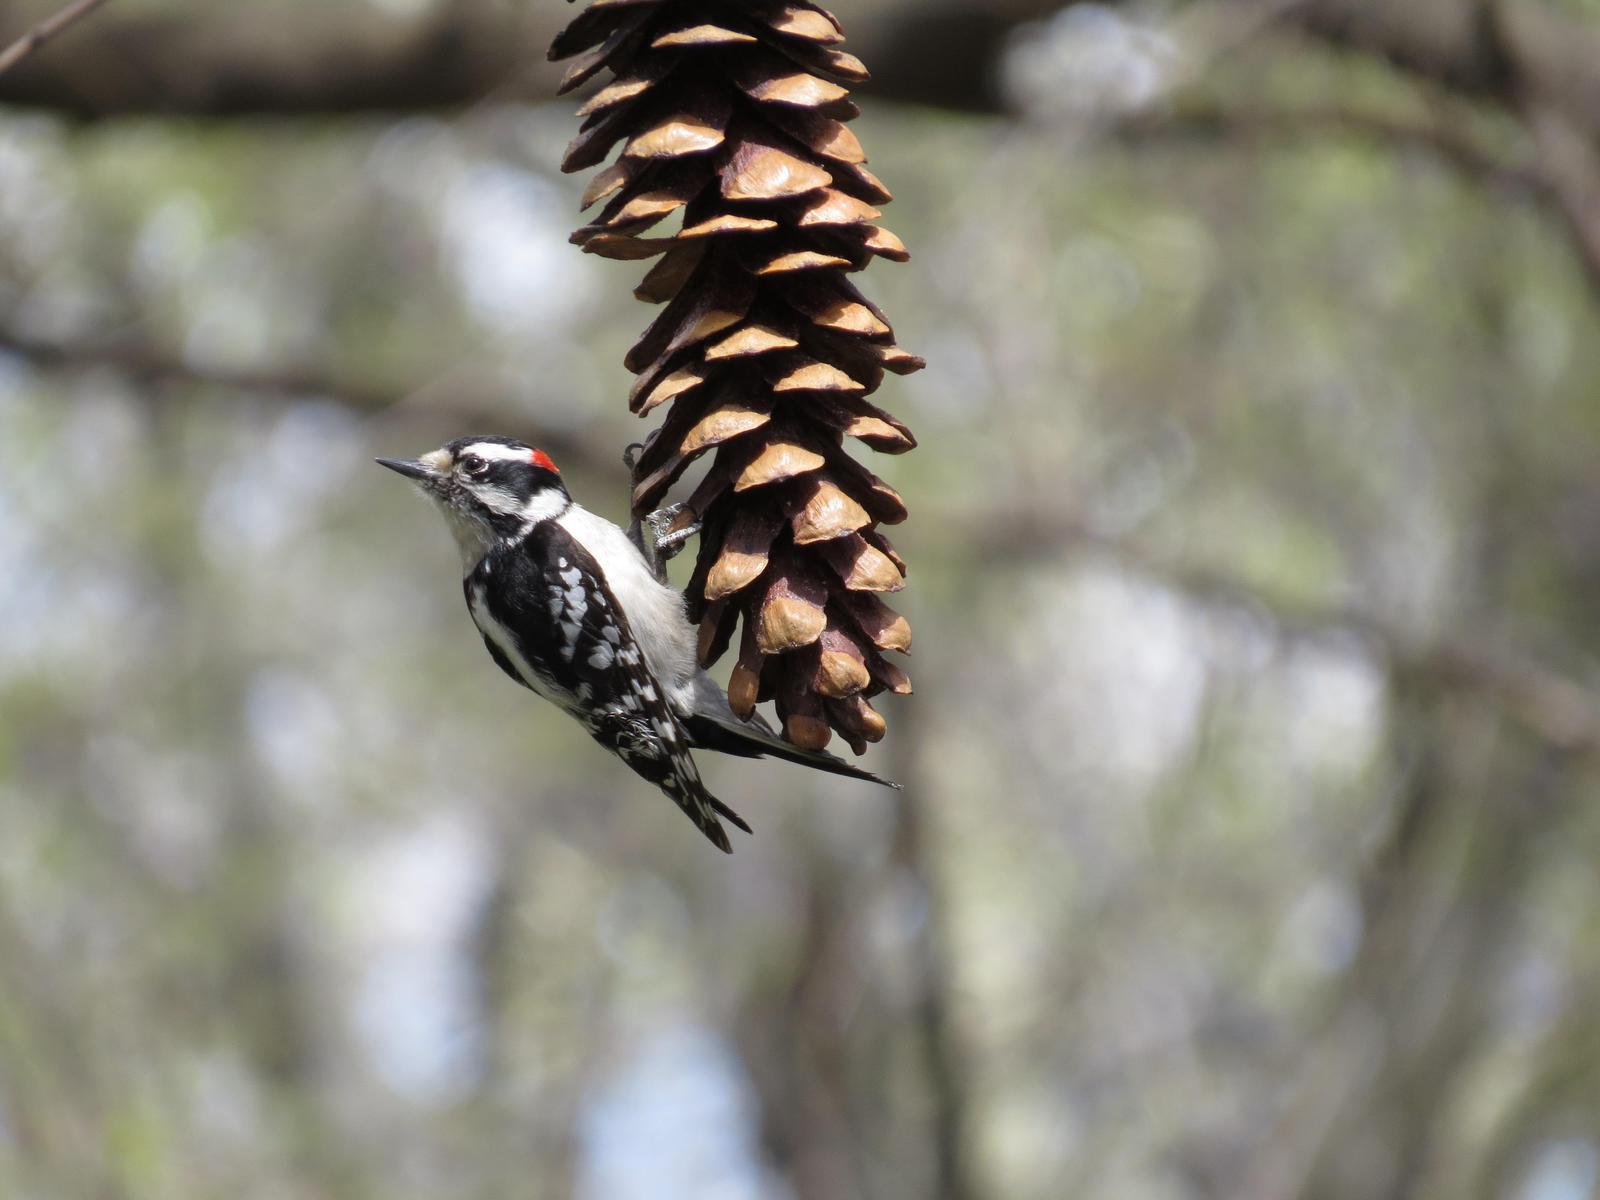 Downy Woodpecker Photo by Anna Chan